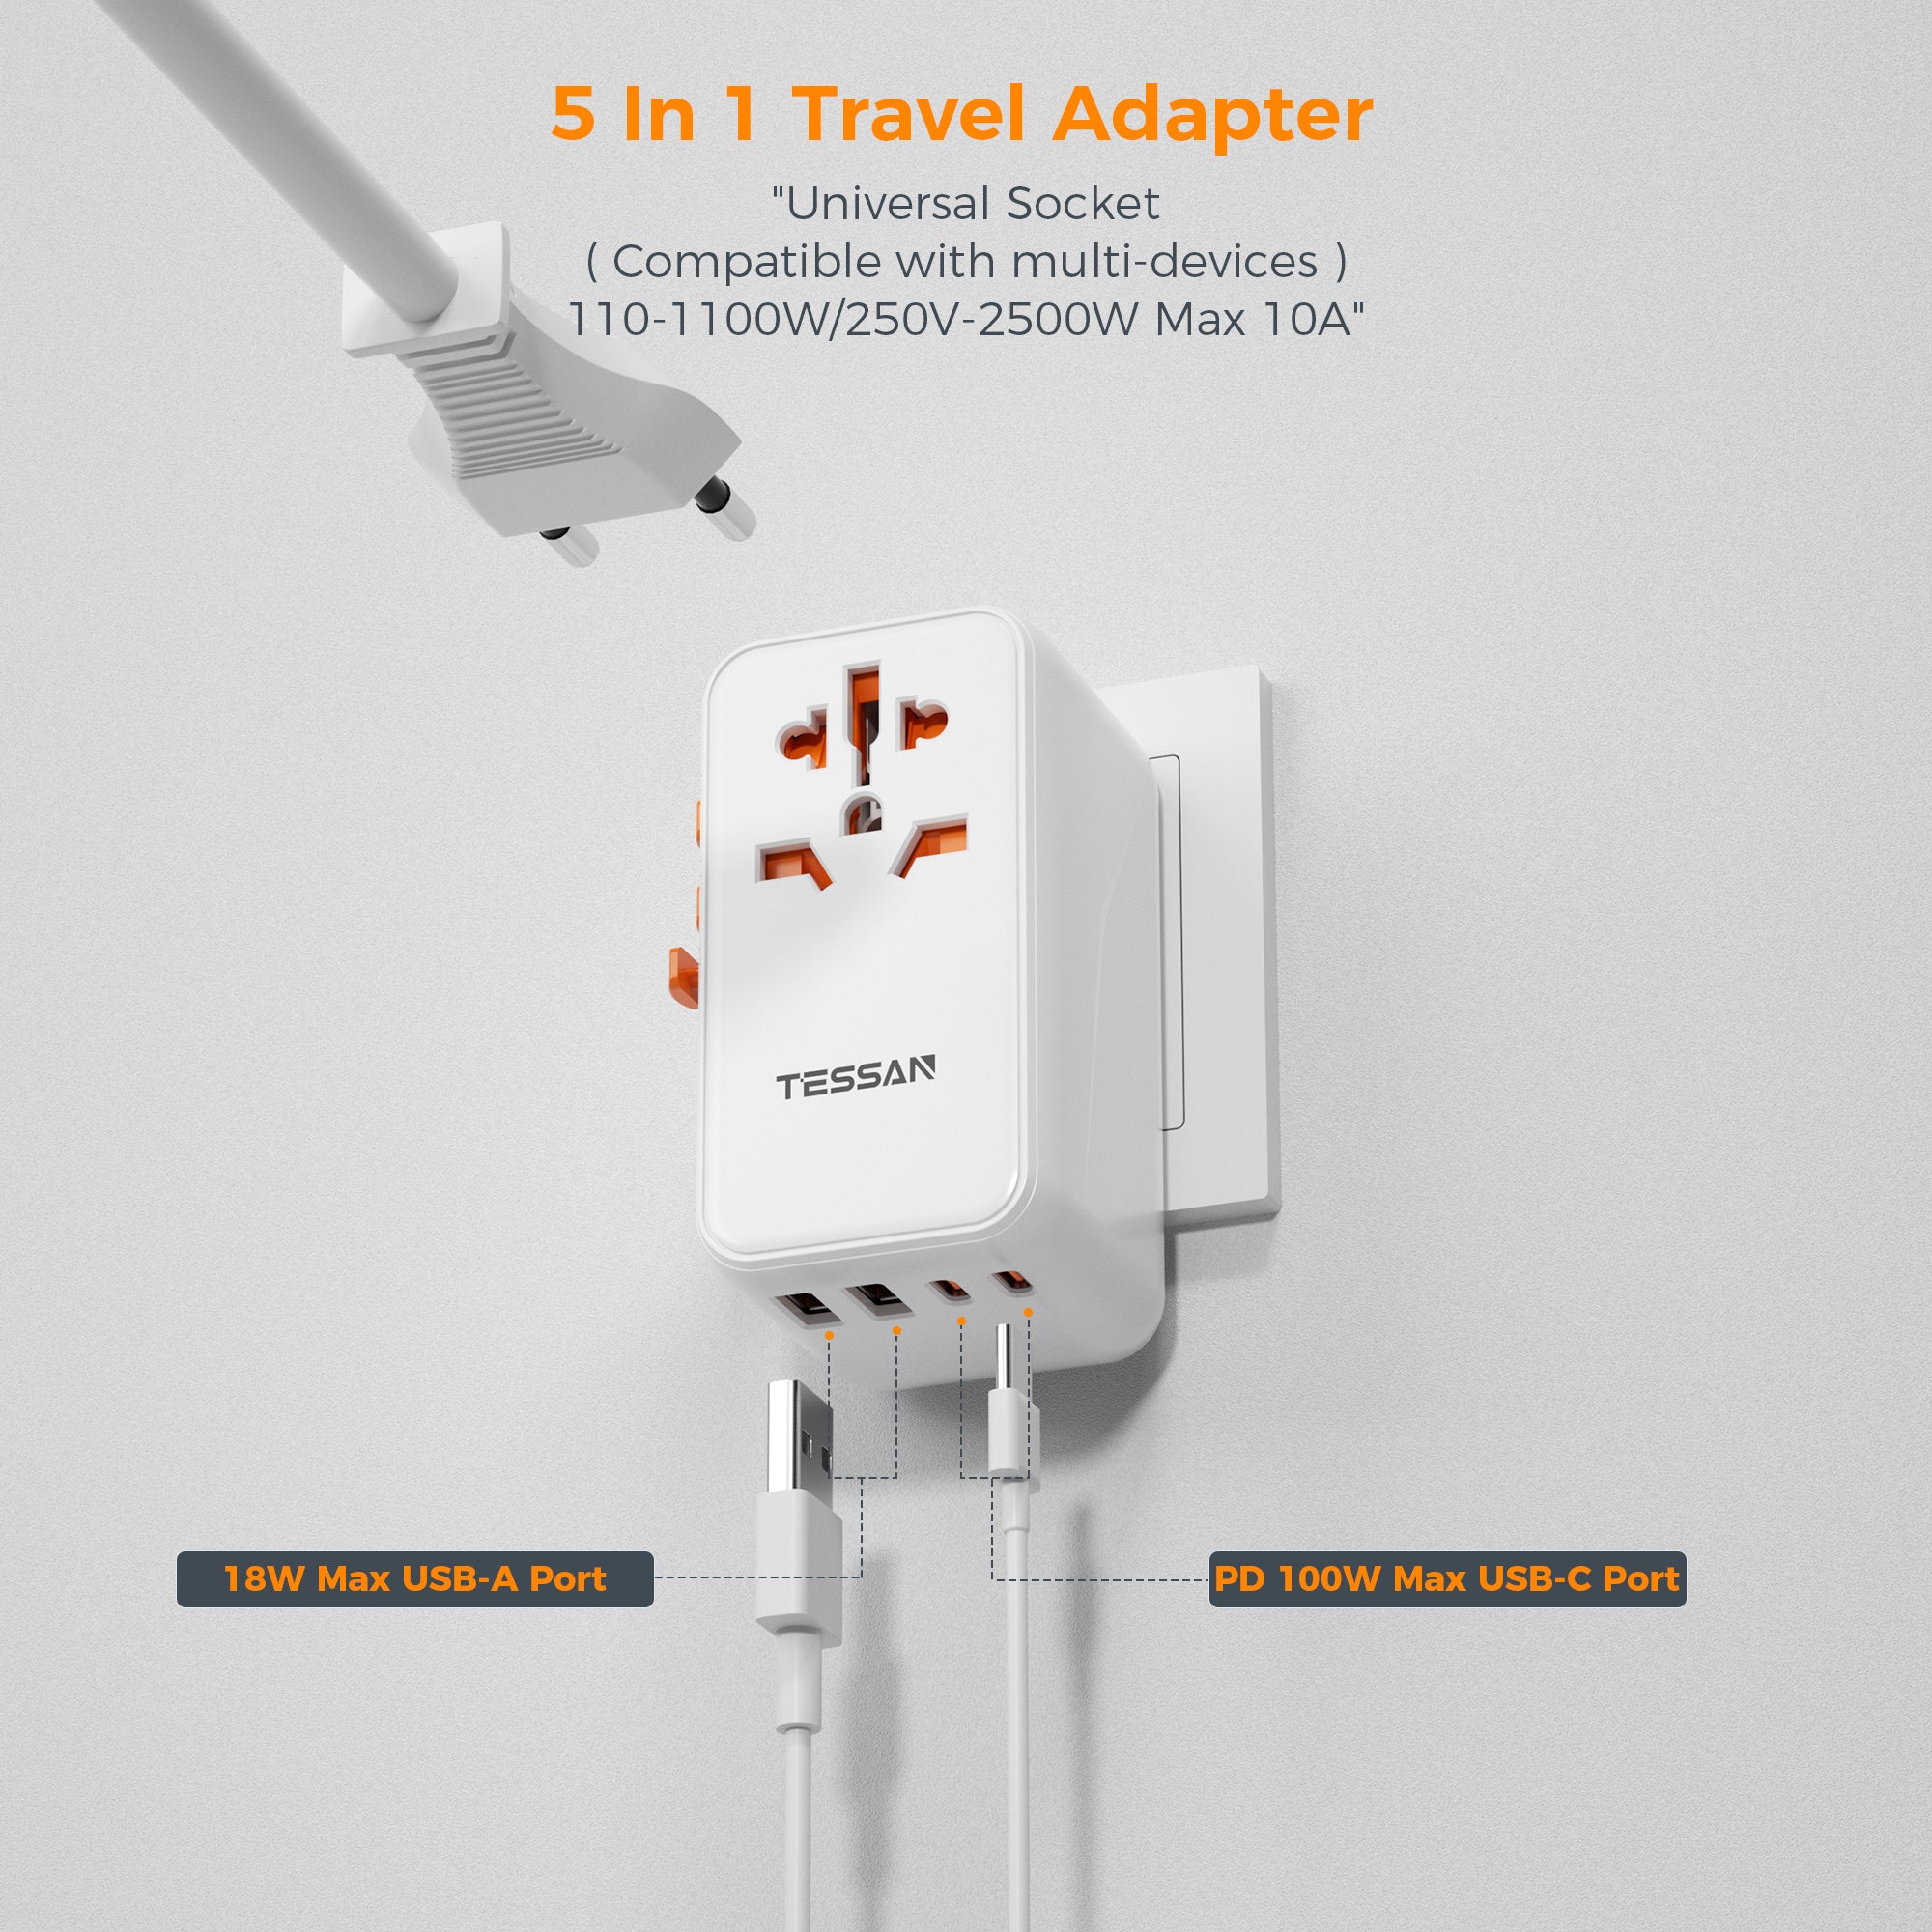 International 5 In 1 Travel Plug Adaptor with 2 USB C and 2 USB Ports (Fast Charging PD 100W)